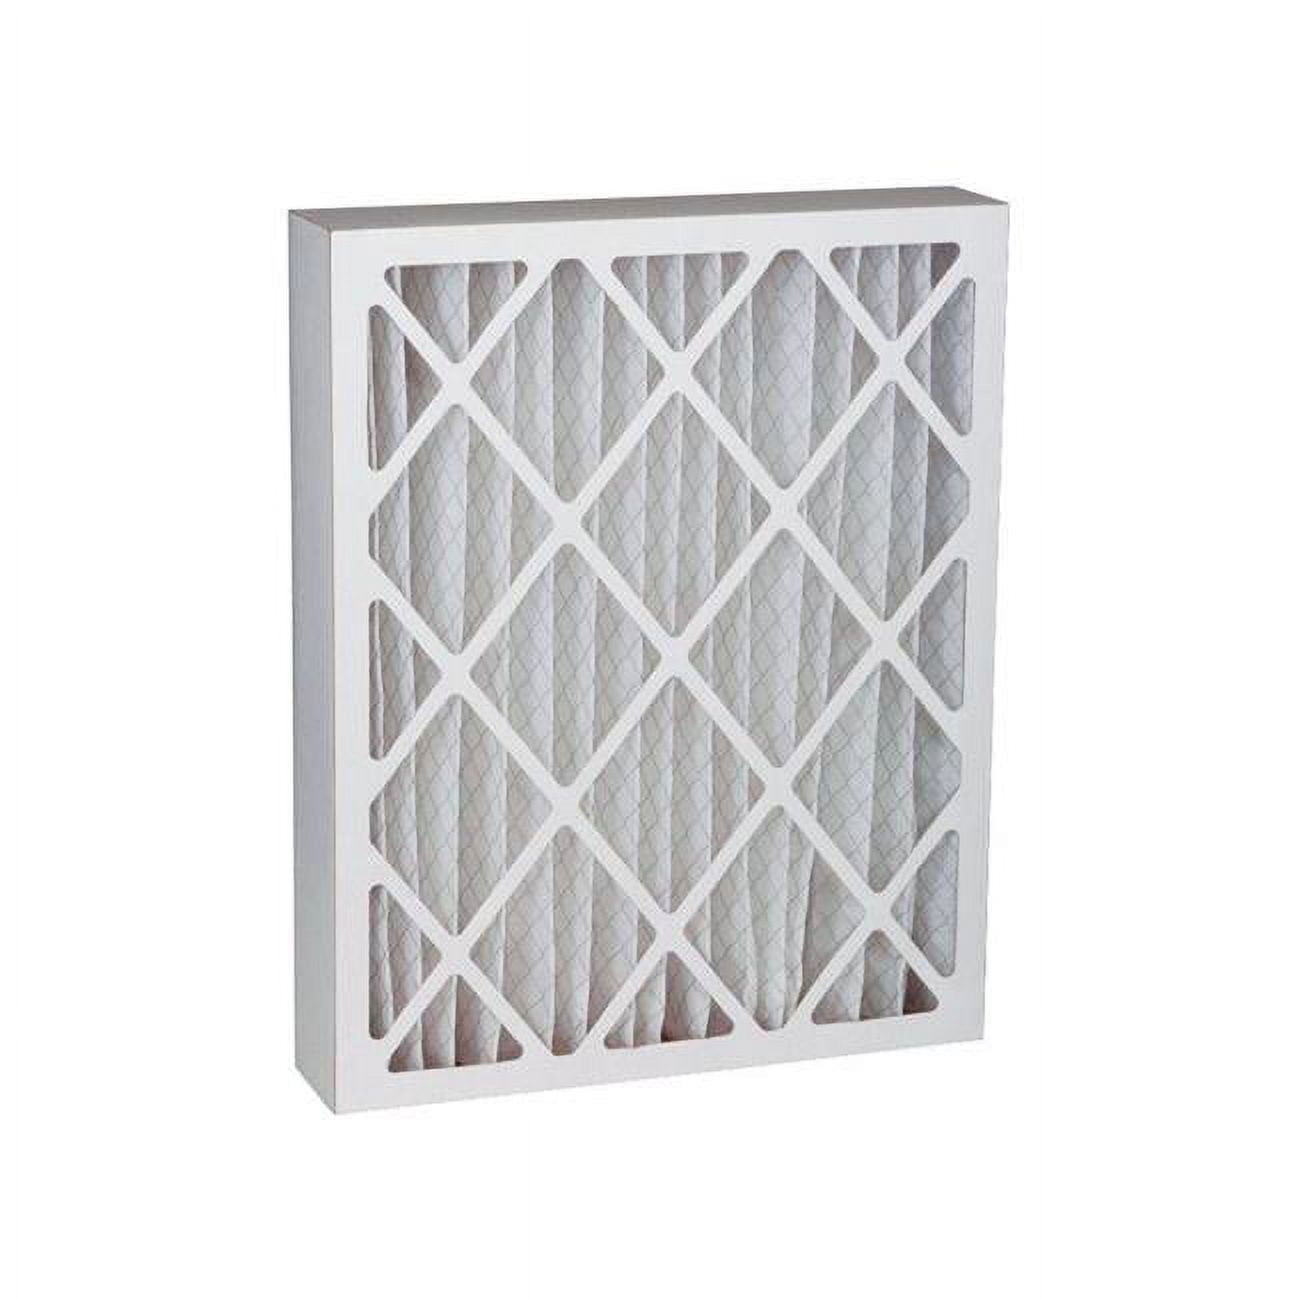 Picture of Bestair 4822789 20 x 20 x 4 in. 8 MERV Pleated Air Filter - Case of 3